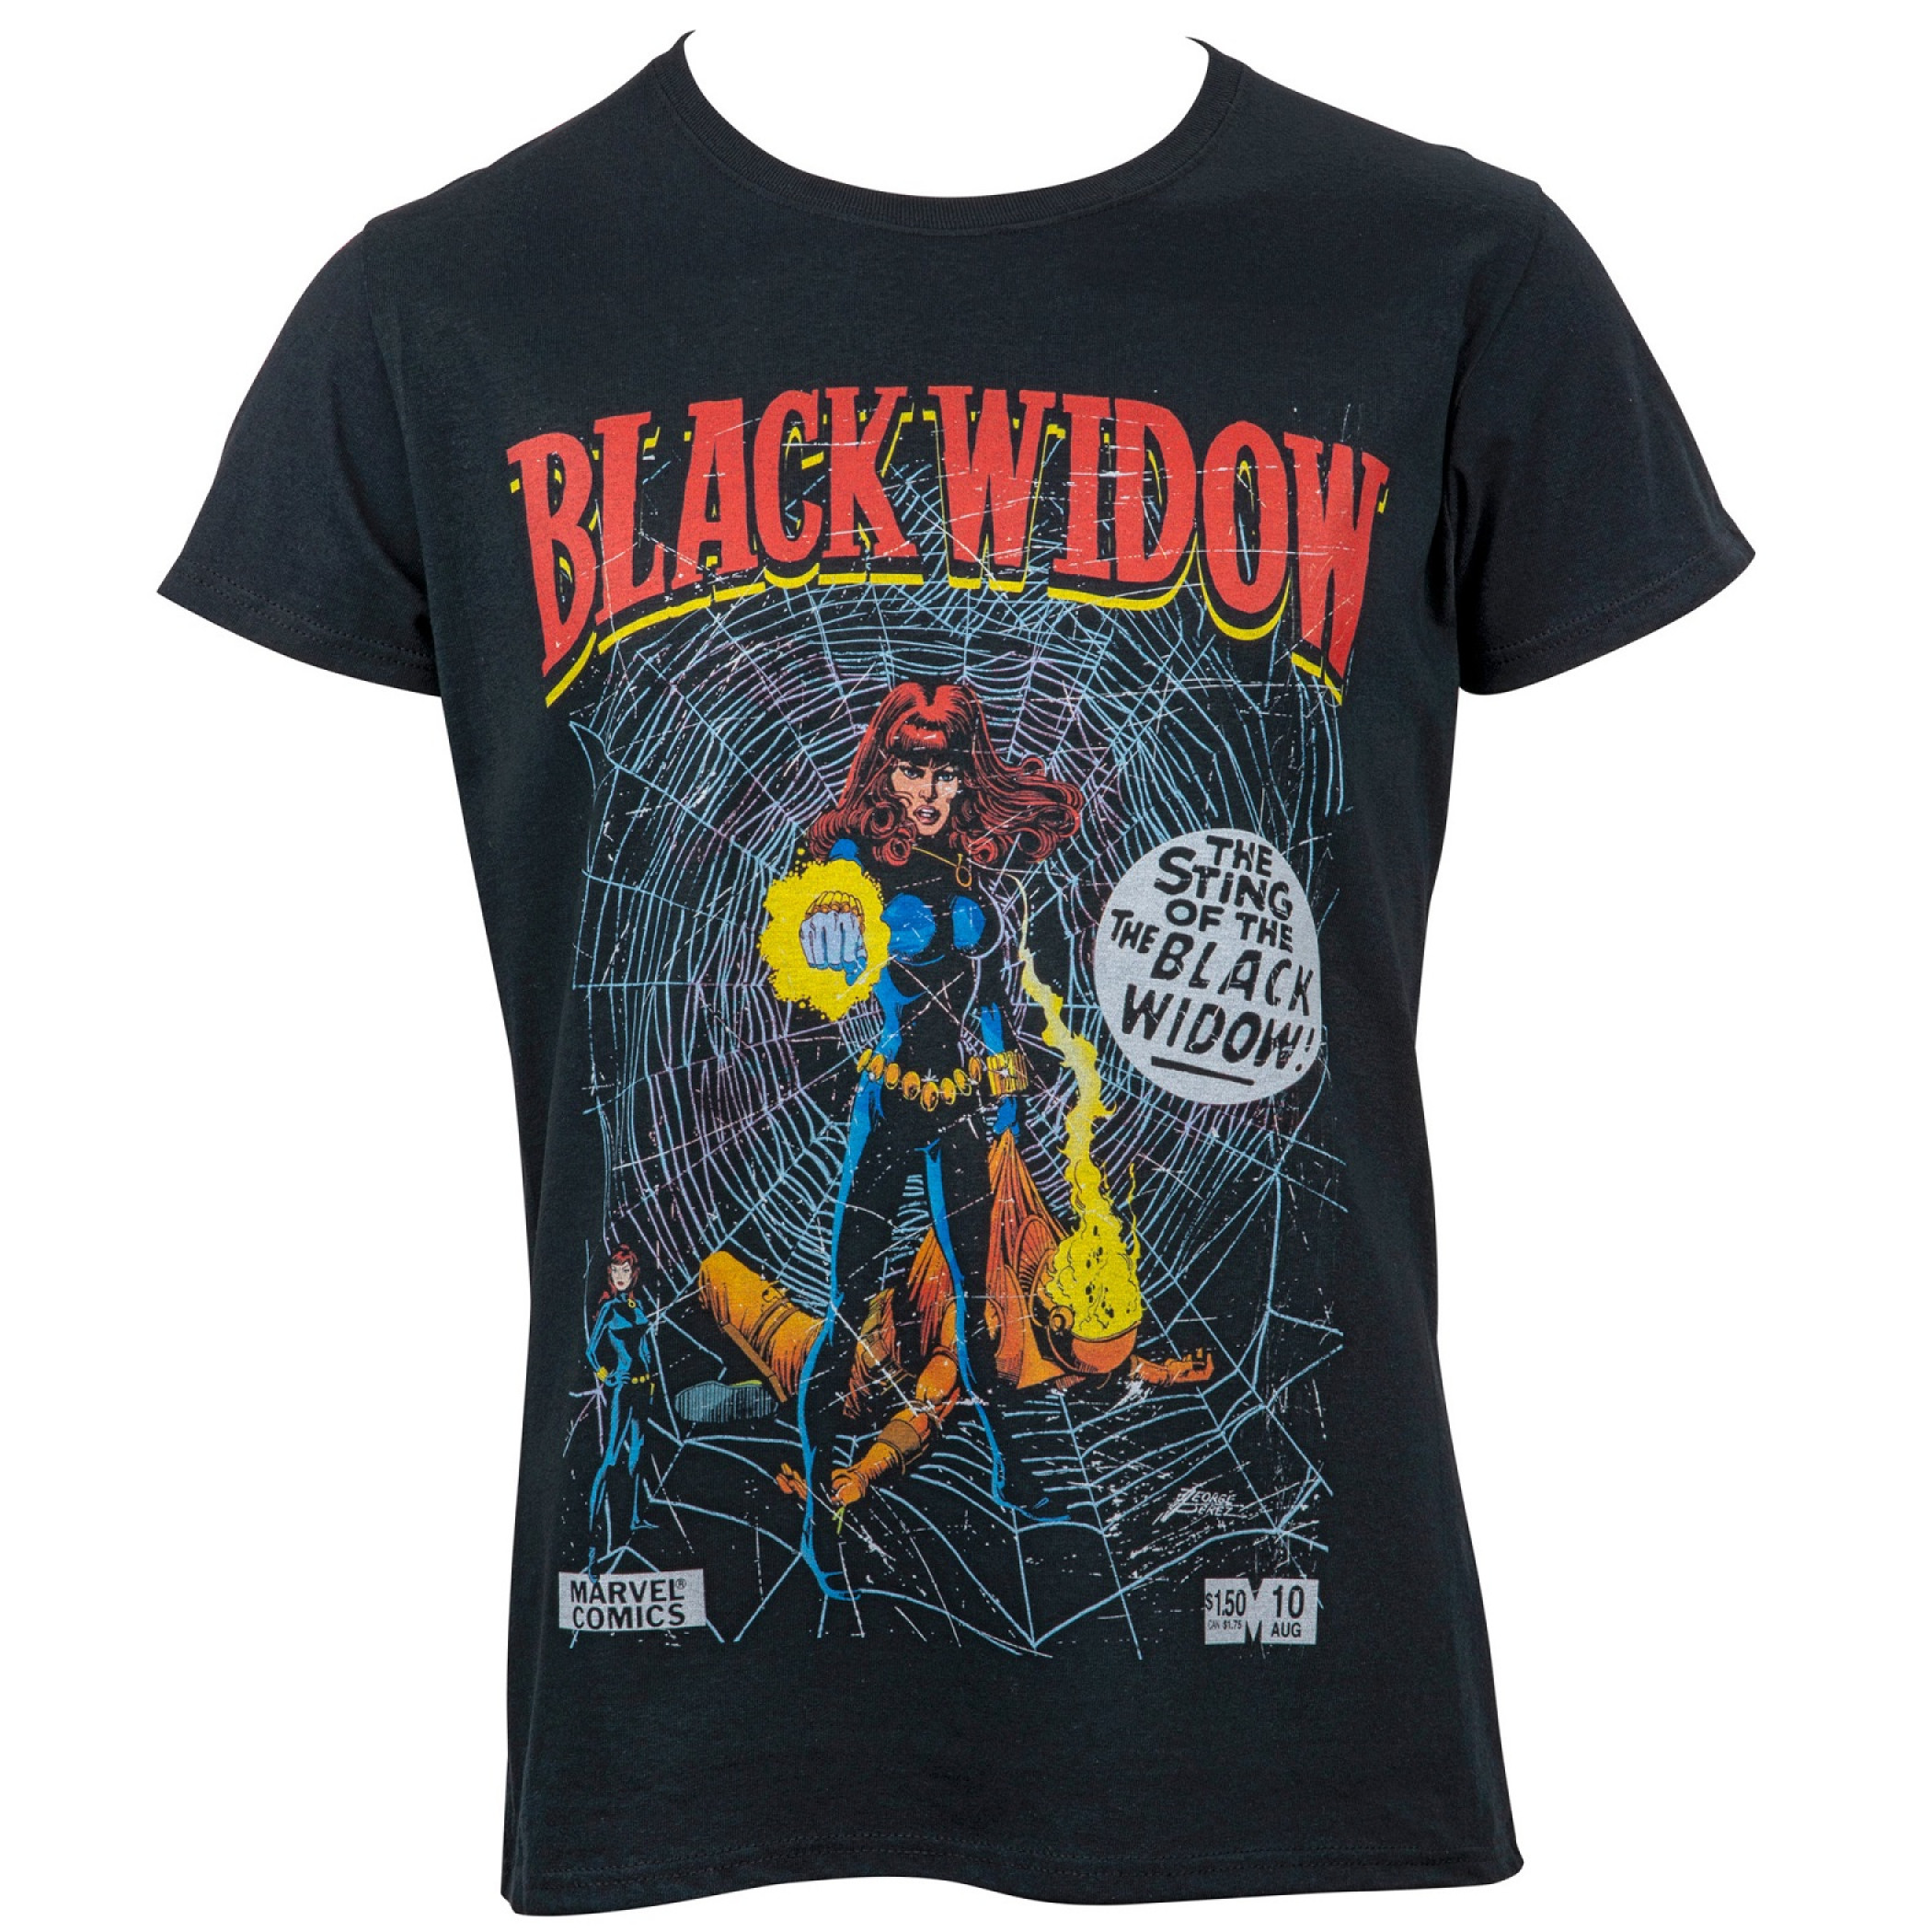 Marvel's Sting of the Black Widow T-shirt